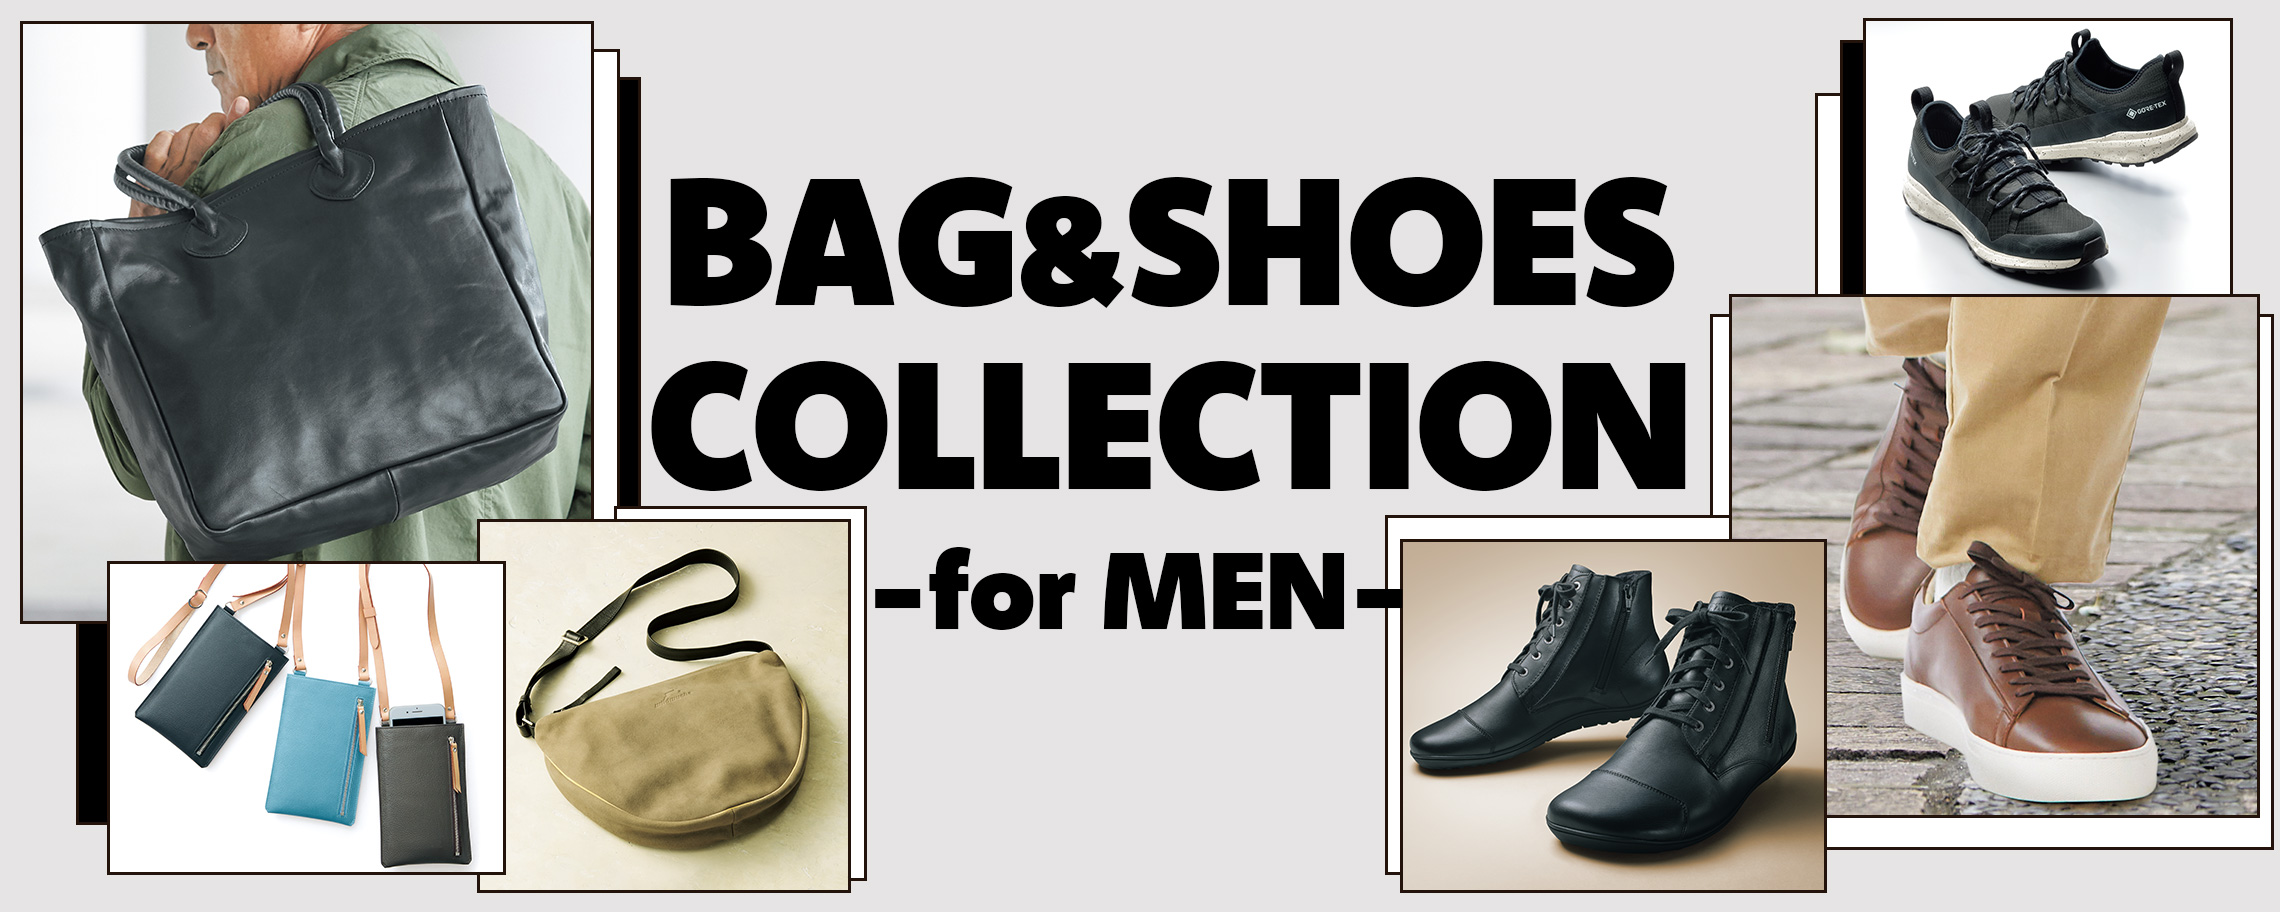 BAG&SHOES COLLECTION for Men